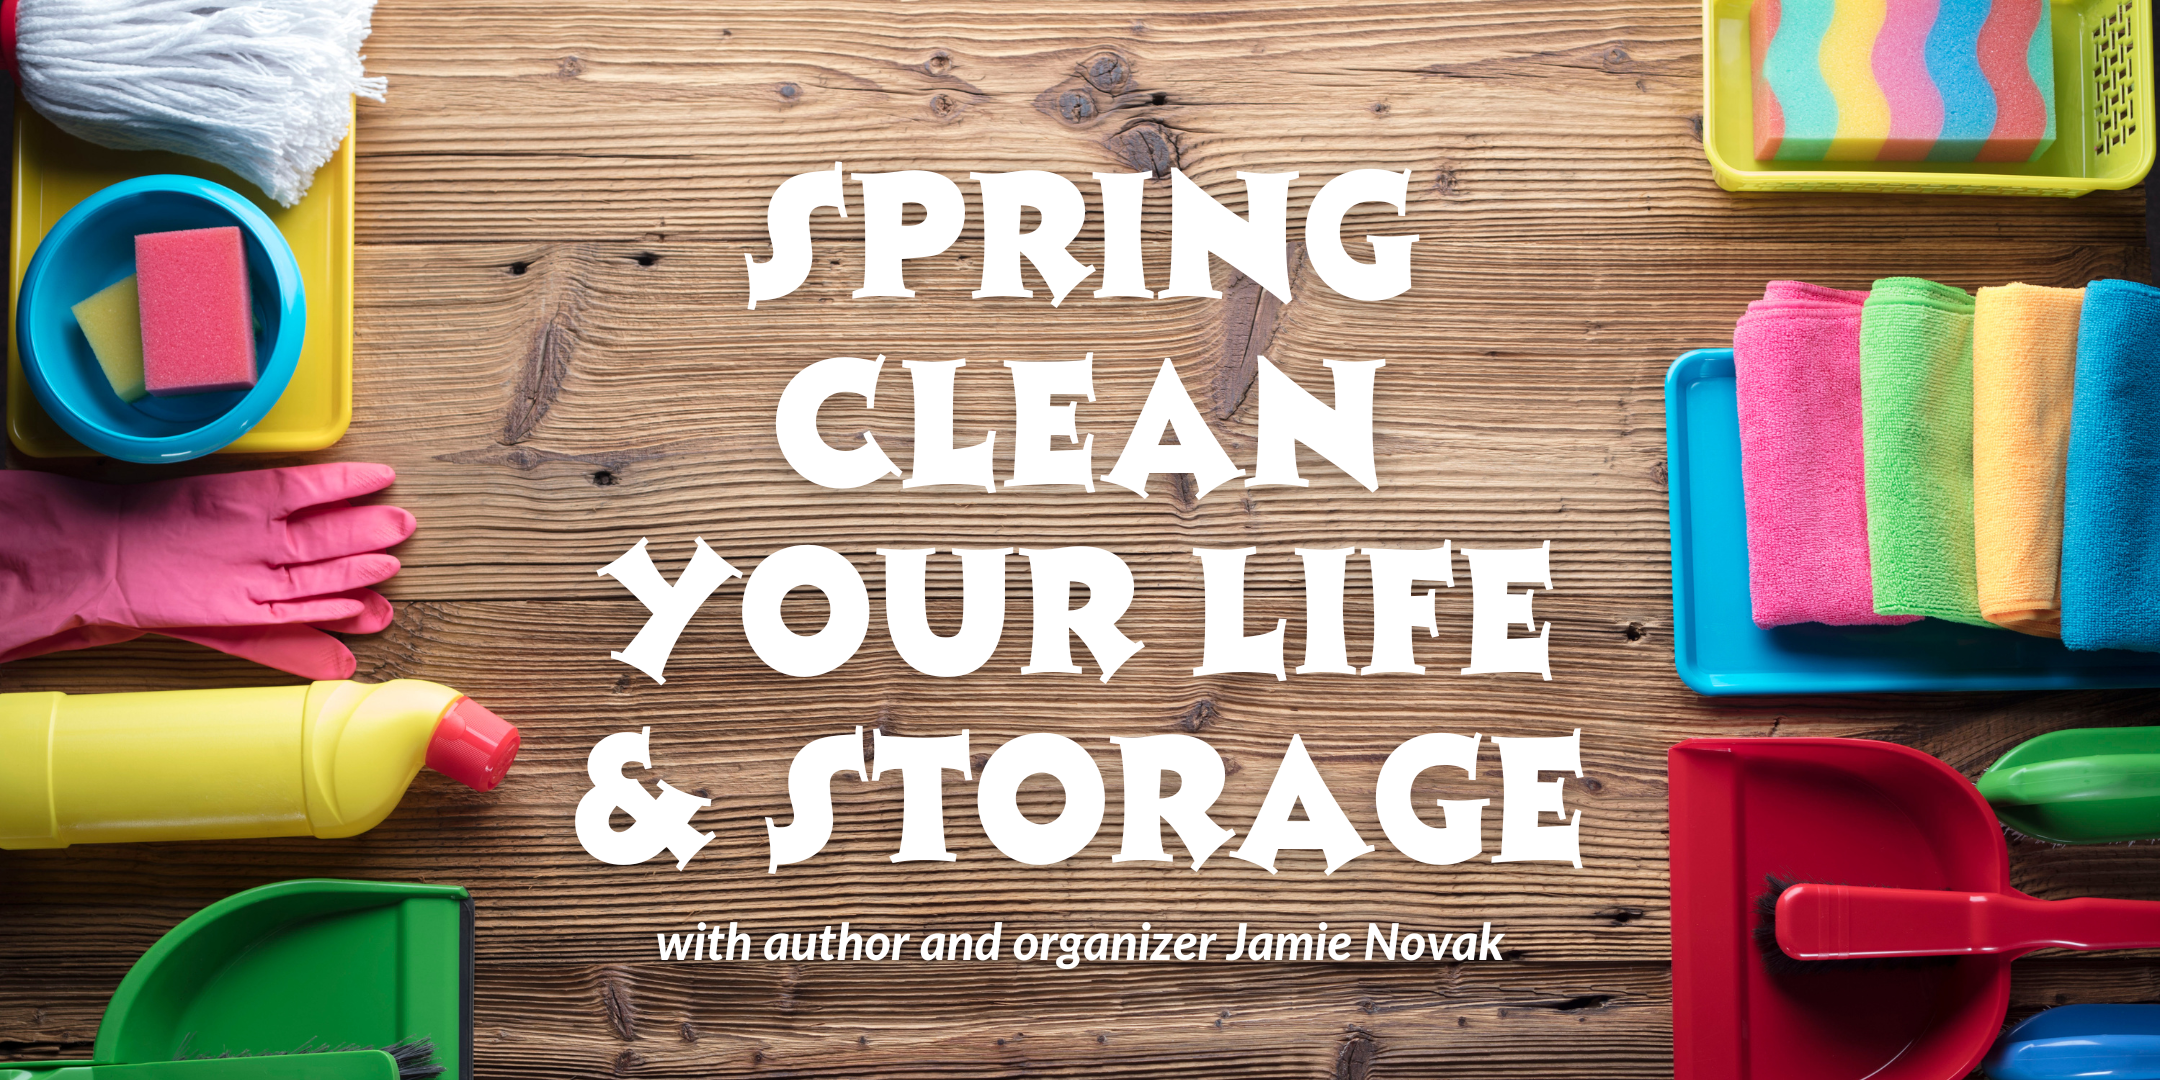 image of "Spring Clean Your Life and Storage" 